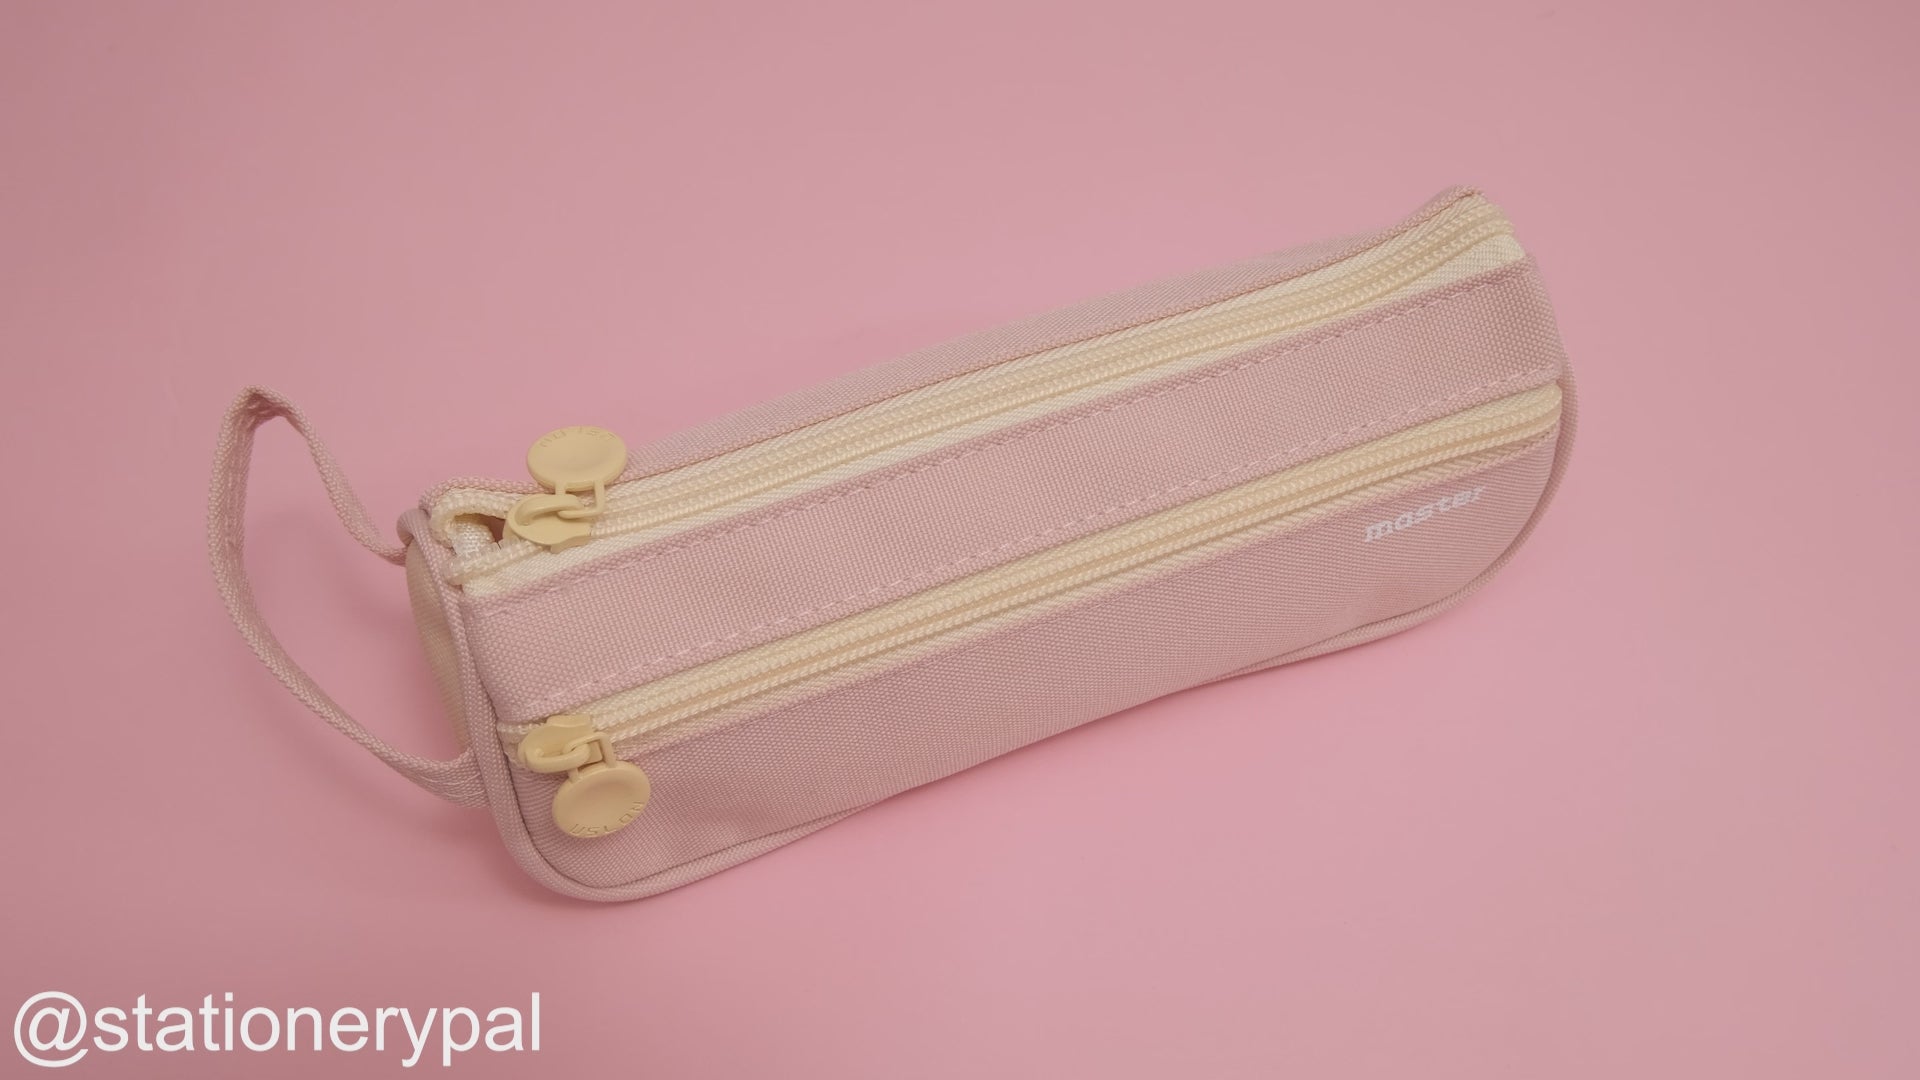 Handheld Double Layer Pencil Pouch - Light Pink